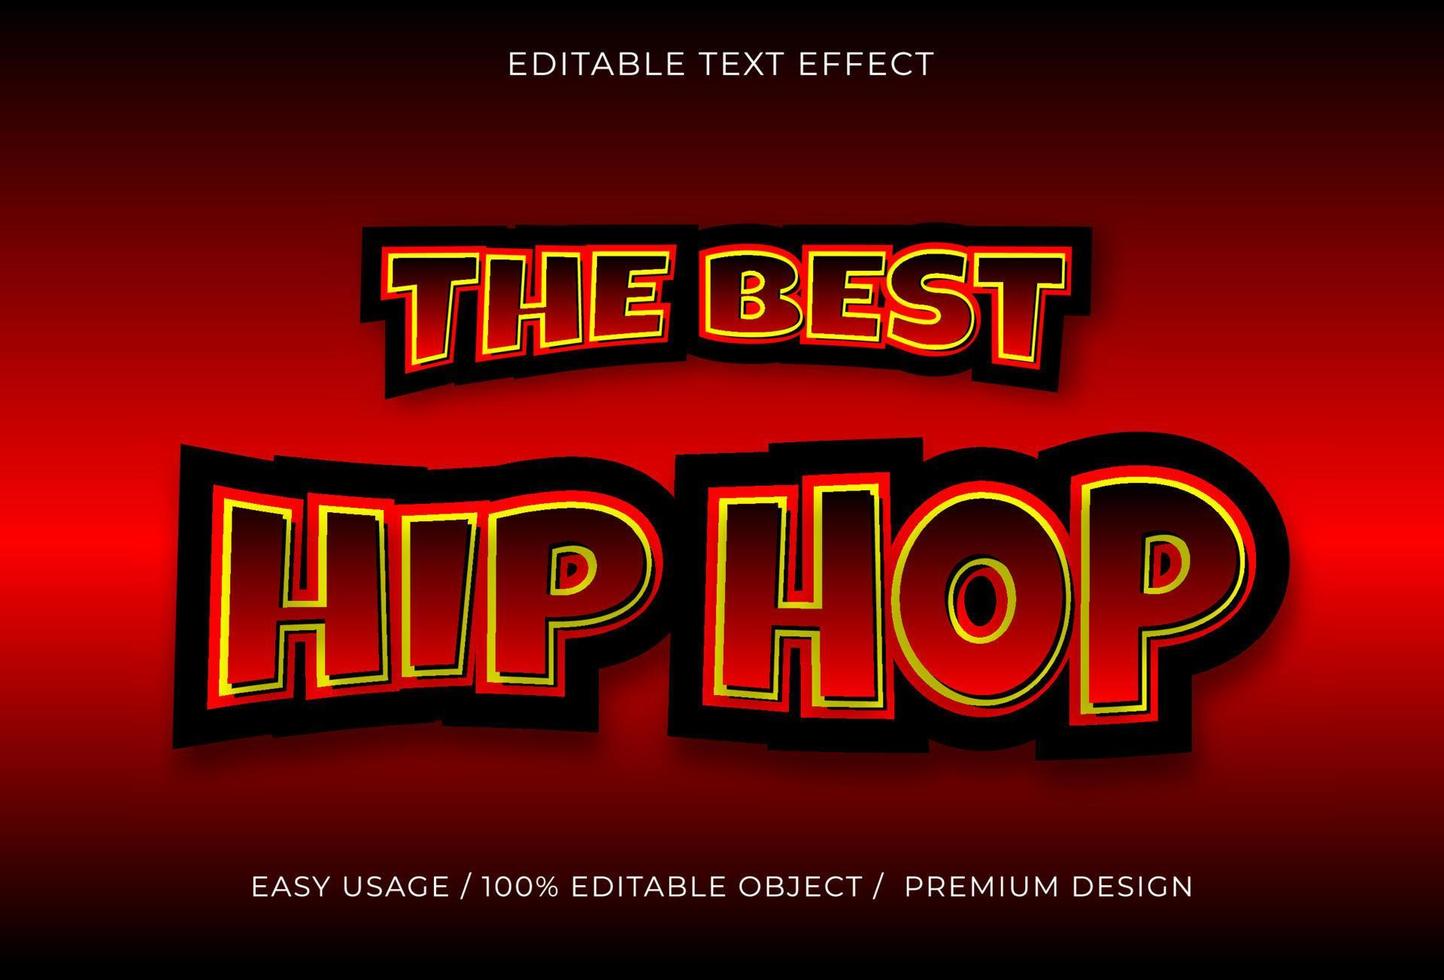 hip hop text effect on graphic style vector